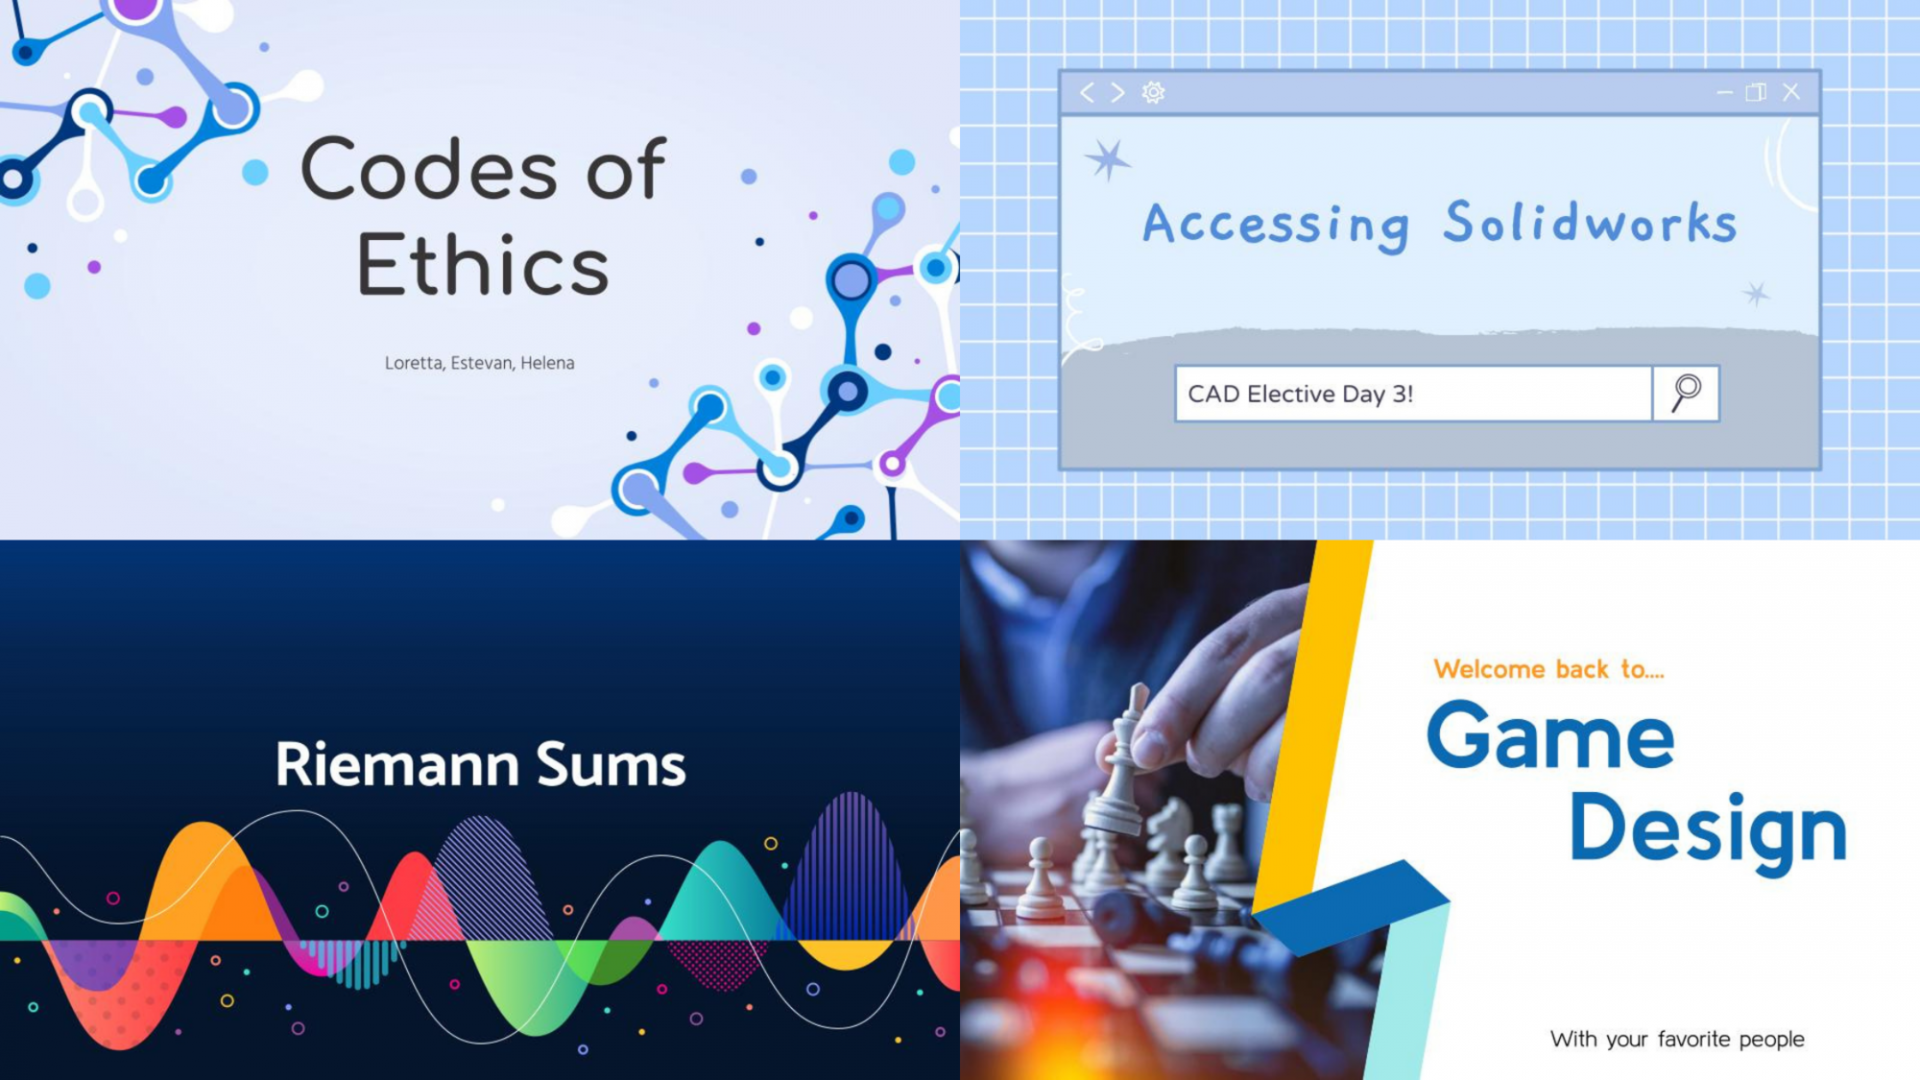 Covers from SHAPE elective courses. Top row: Codes of Ethics from Ethics in Engineering, Accessing Solidworks from Computer-Aided DesignBottom row: Reimann Sums from Multivariate Calculus, Welcome Back to Game Design from Game Design